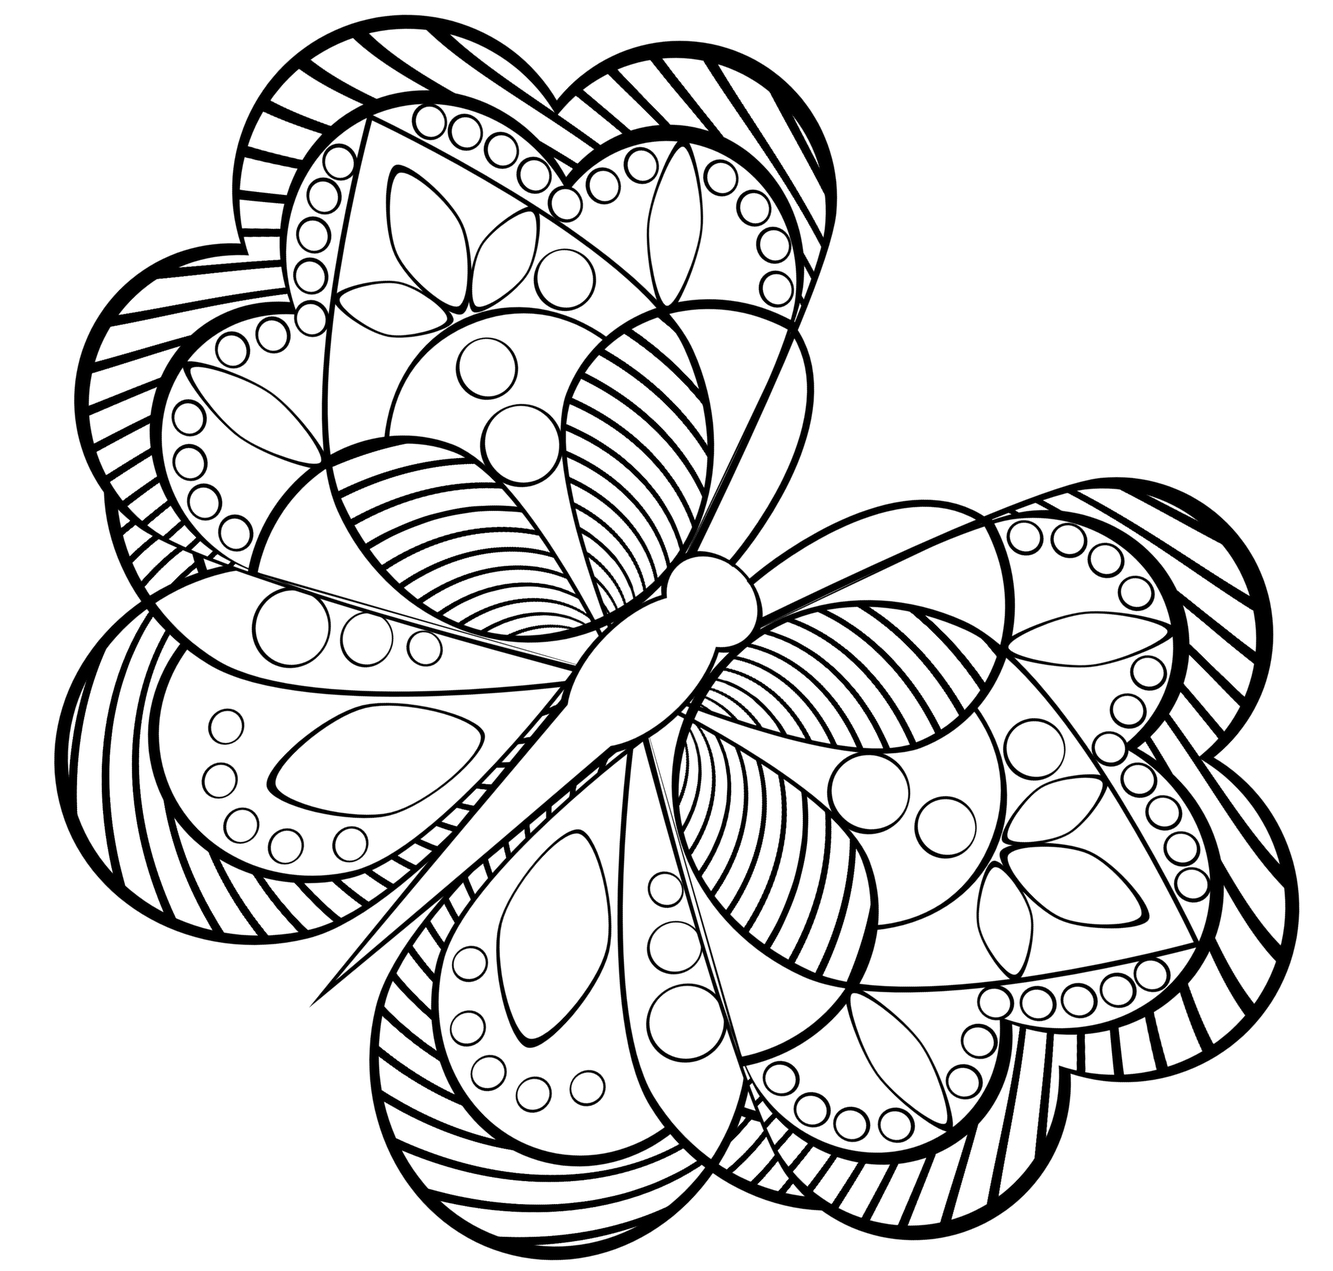 Mosaic Coloring Pages For Kids at GetDrawings Free download